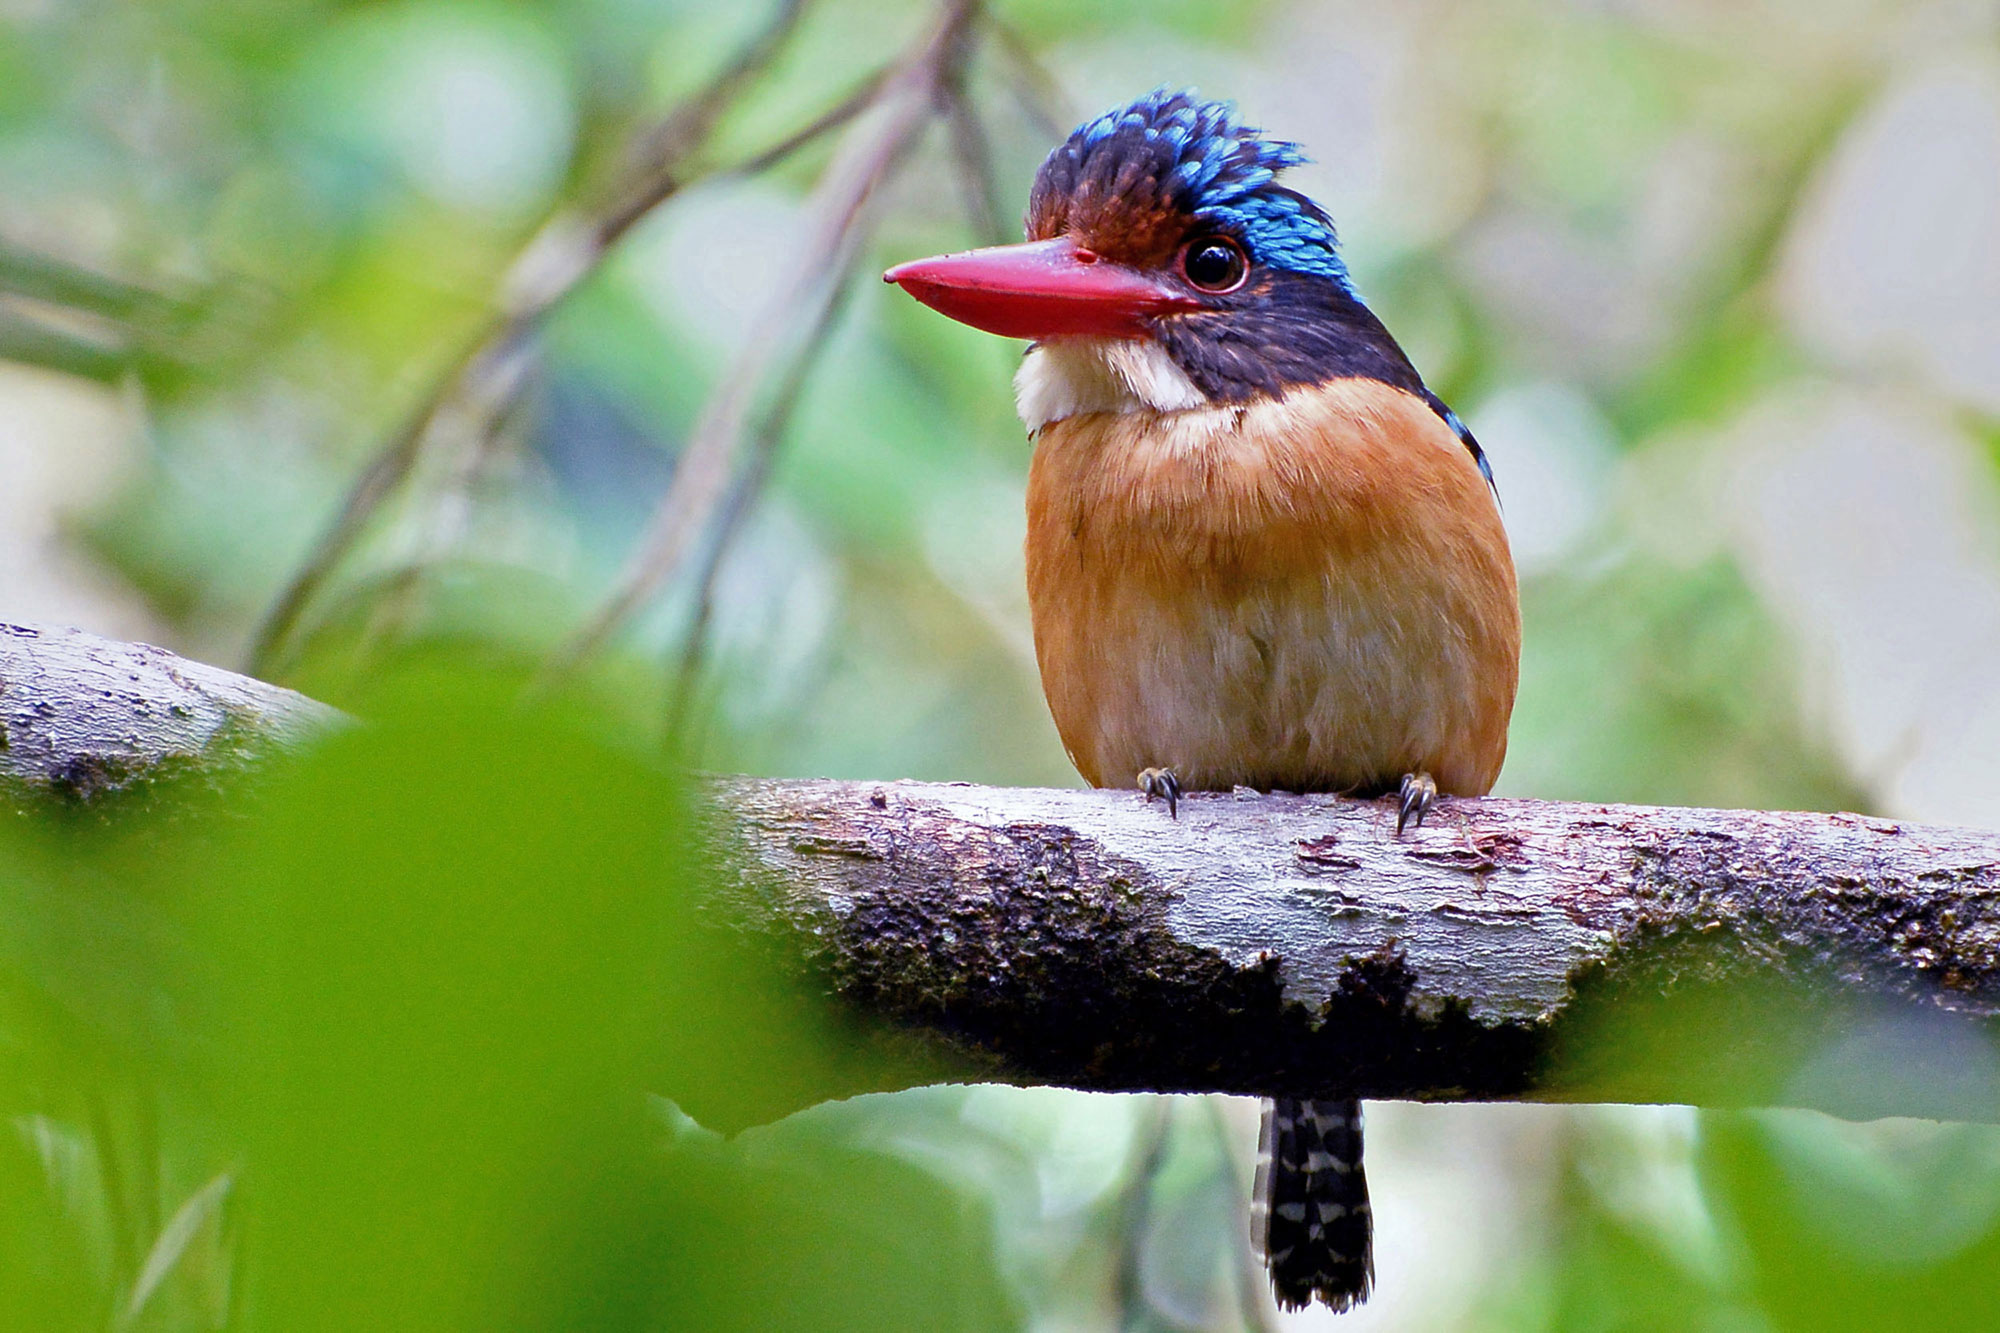 Photograph of a banded kingfisher sitting on a thick branch. The photo shows a small bird with a blue head, a white throat, an orange breast, and a red beak.